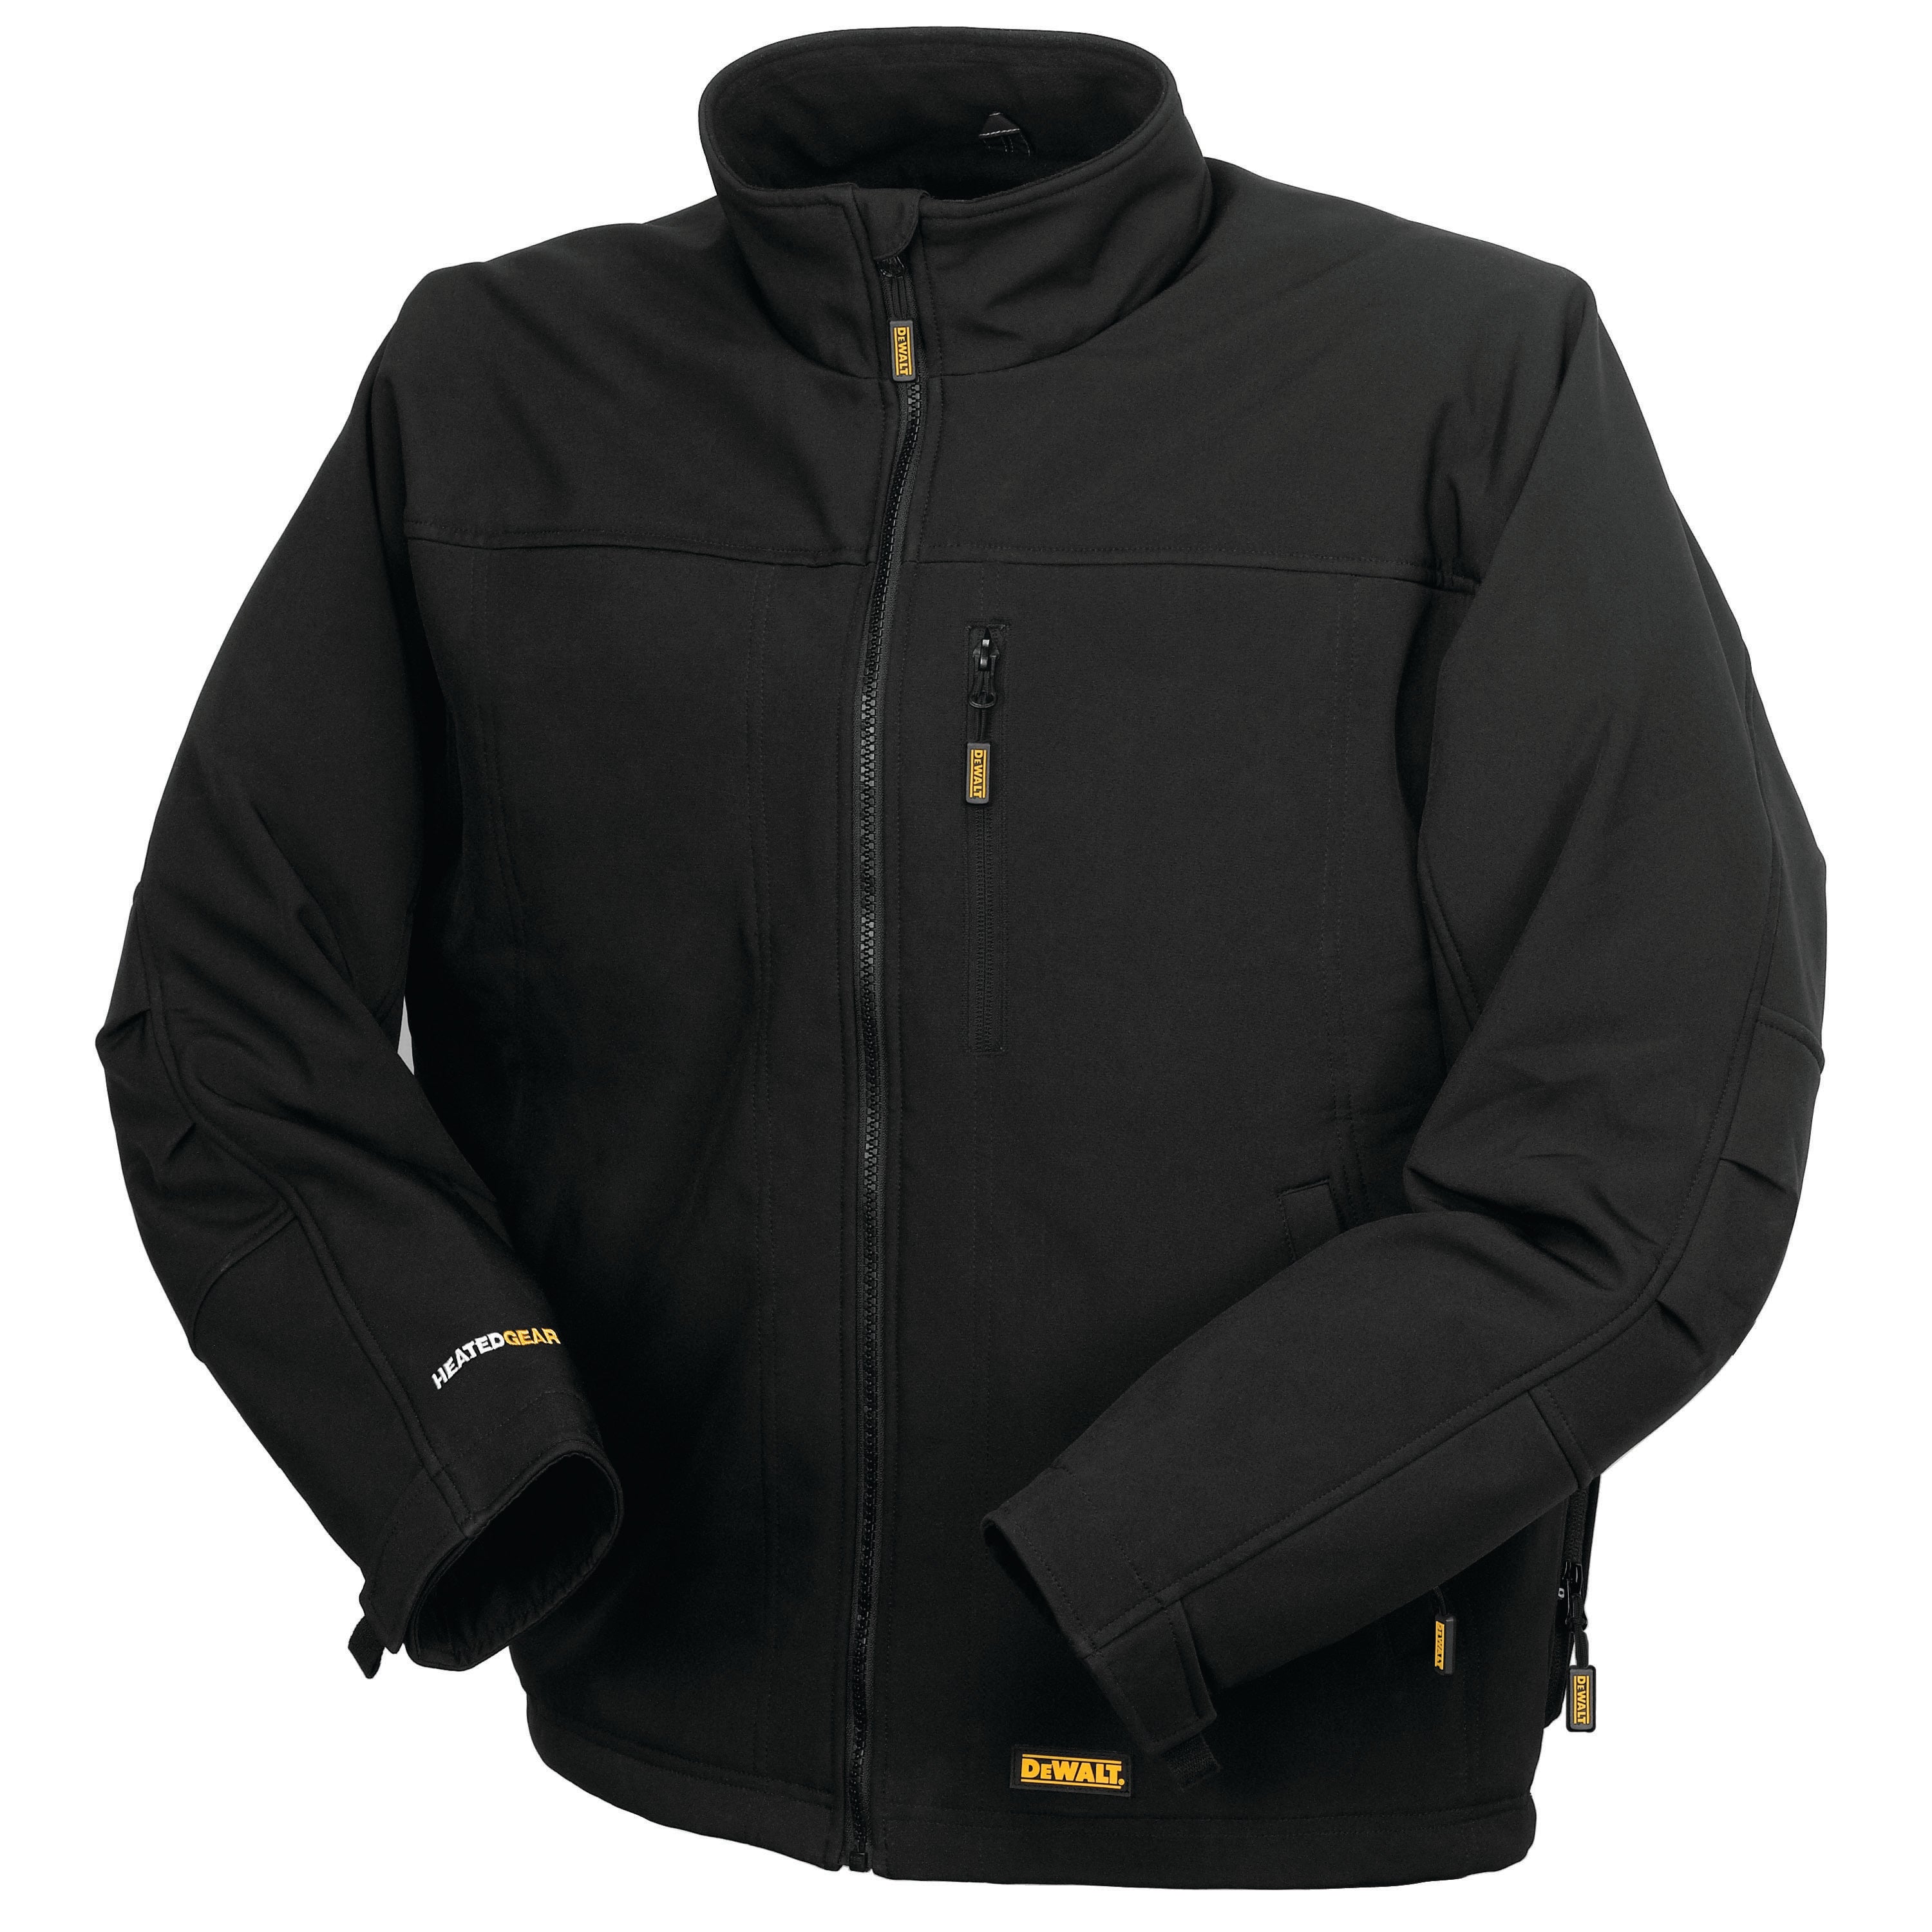 Chaqueta Soft Shell calefactable para hombre Kitted